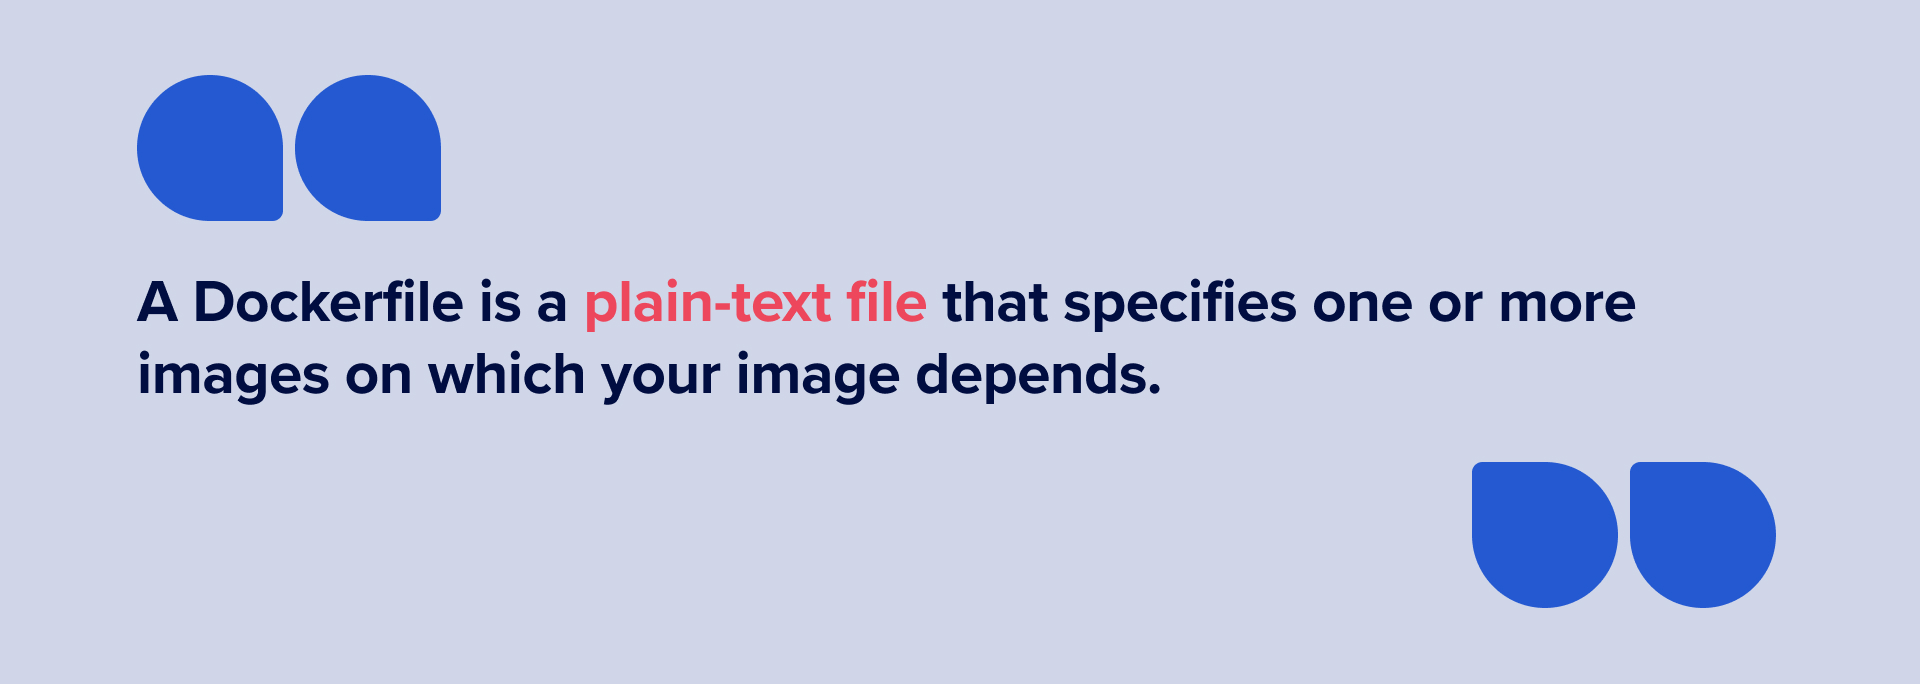 A Dockerfile is a plain-text file that specifies one or more images on which your image depends